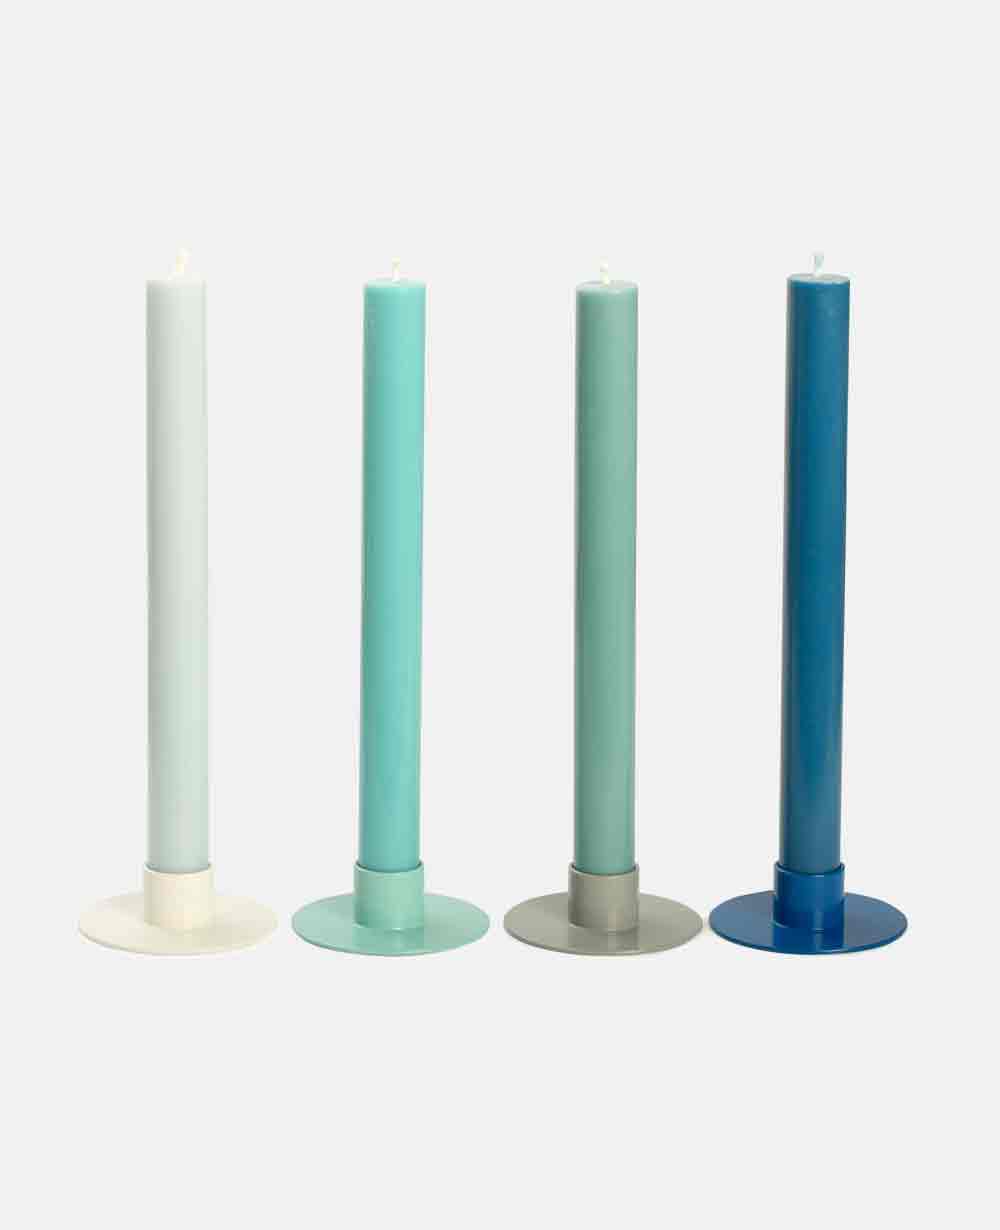 CANDLE SET OF 4 "OCEAN”